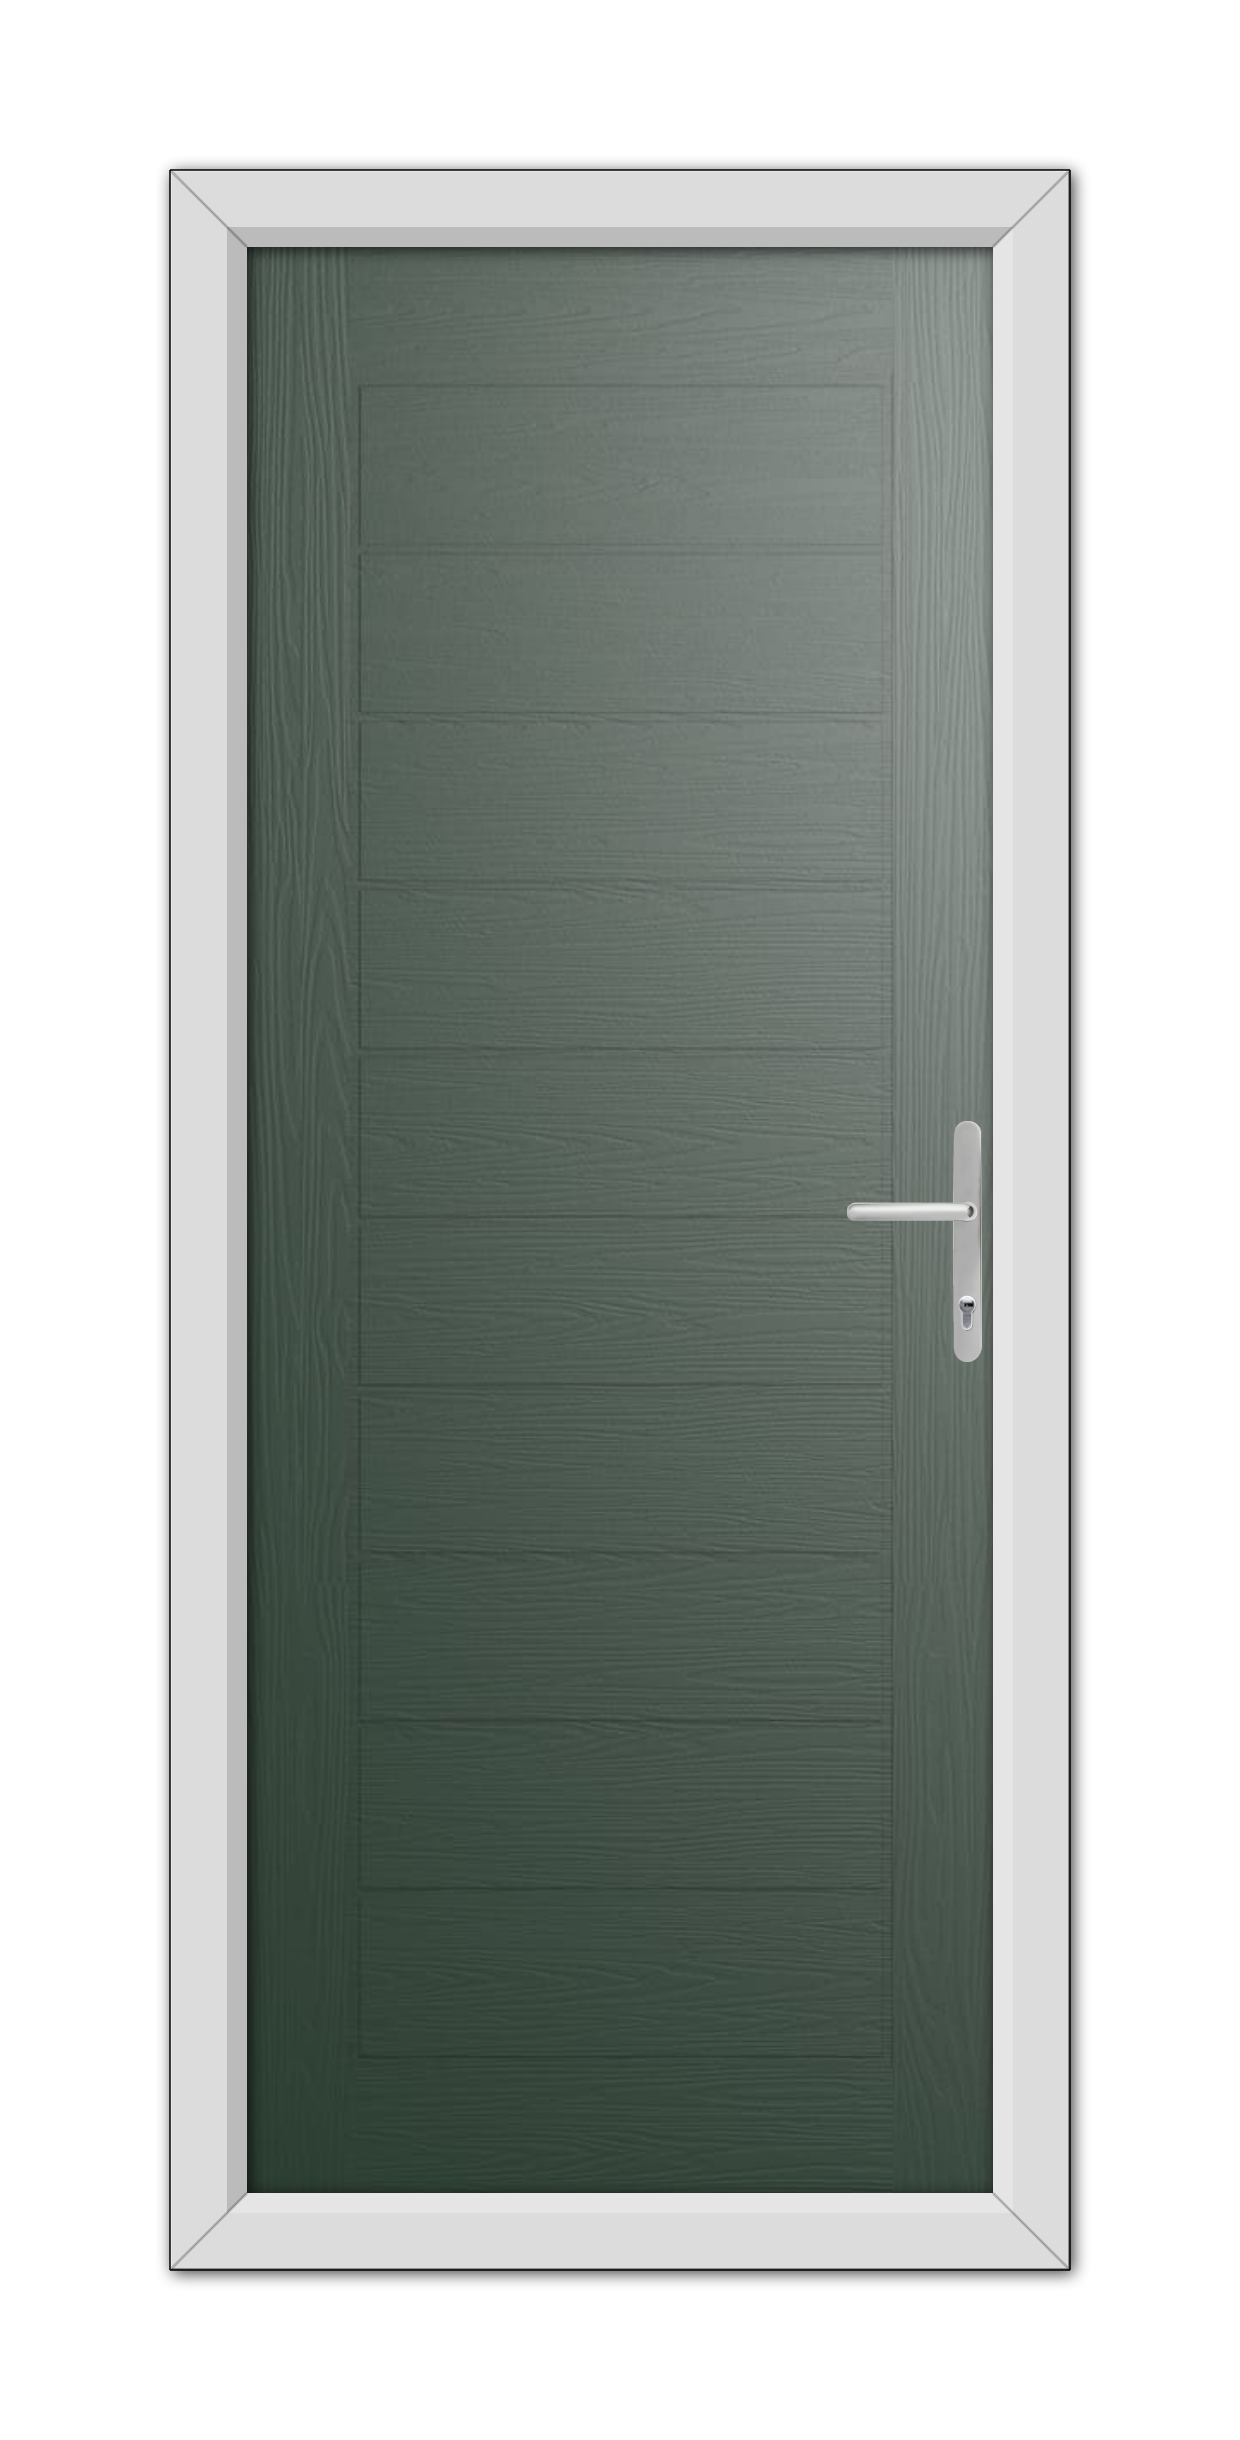 A Green Cambridge Composite Door 48mm Timber Core with a horizontal panel design installed in a white frame, featuring a modern silver handle on the right side.